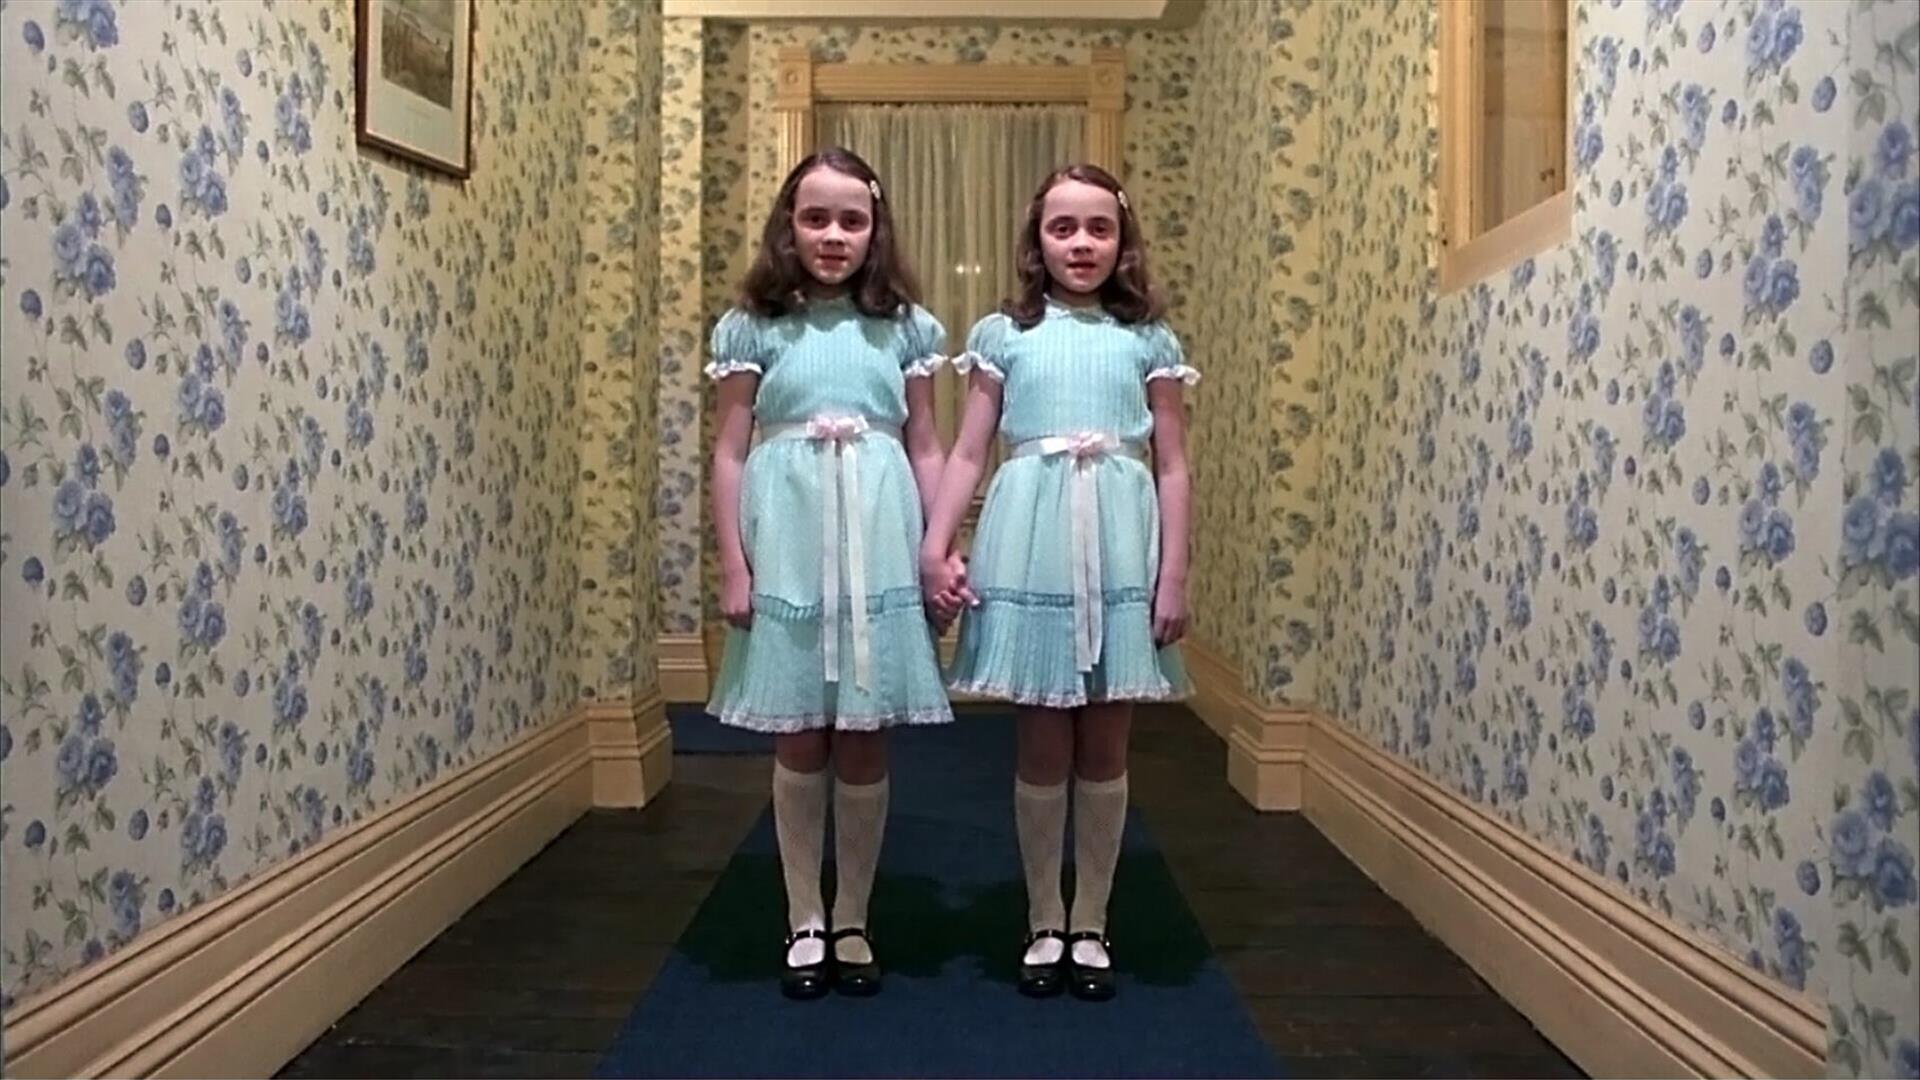 Twin girls holding hands in the hallway - both wearing the same blue dress with a white ribbon around the waist